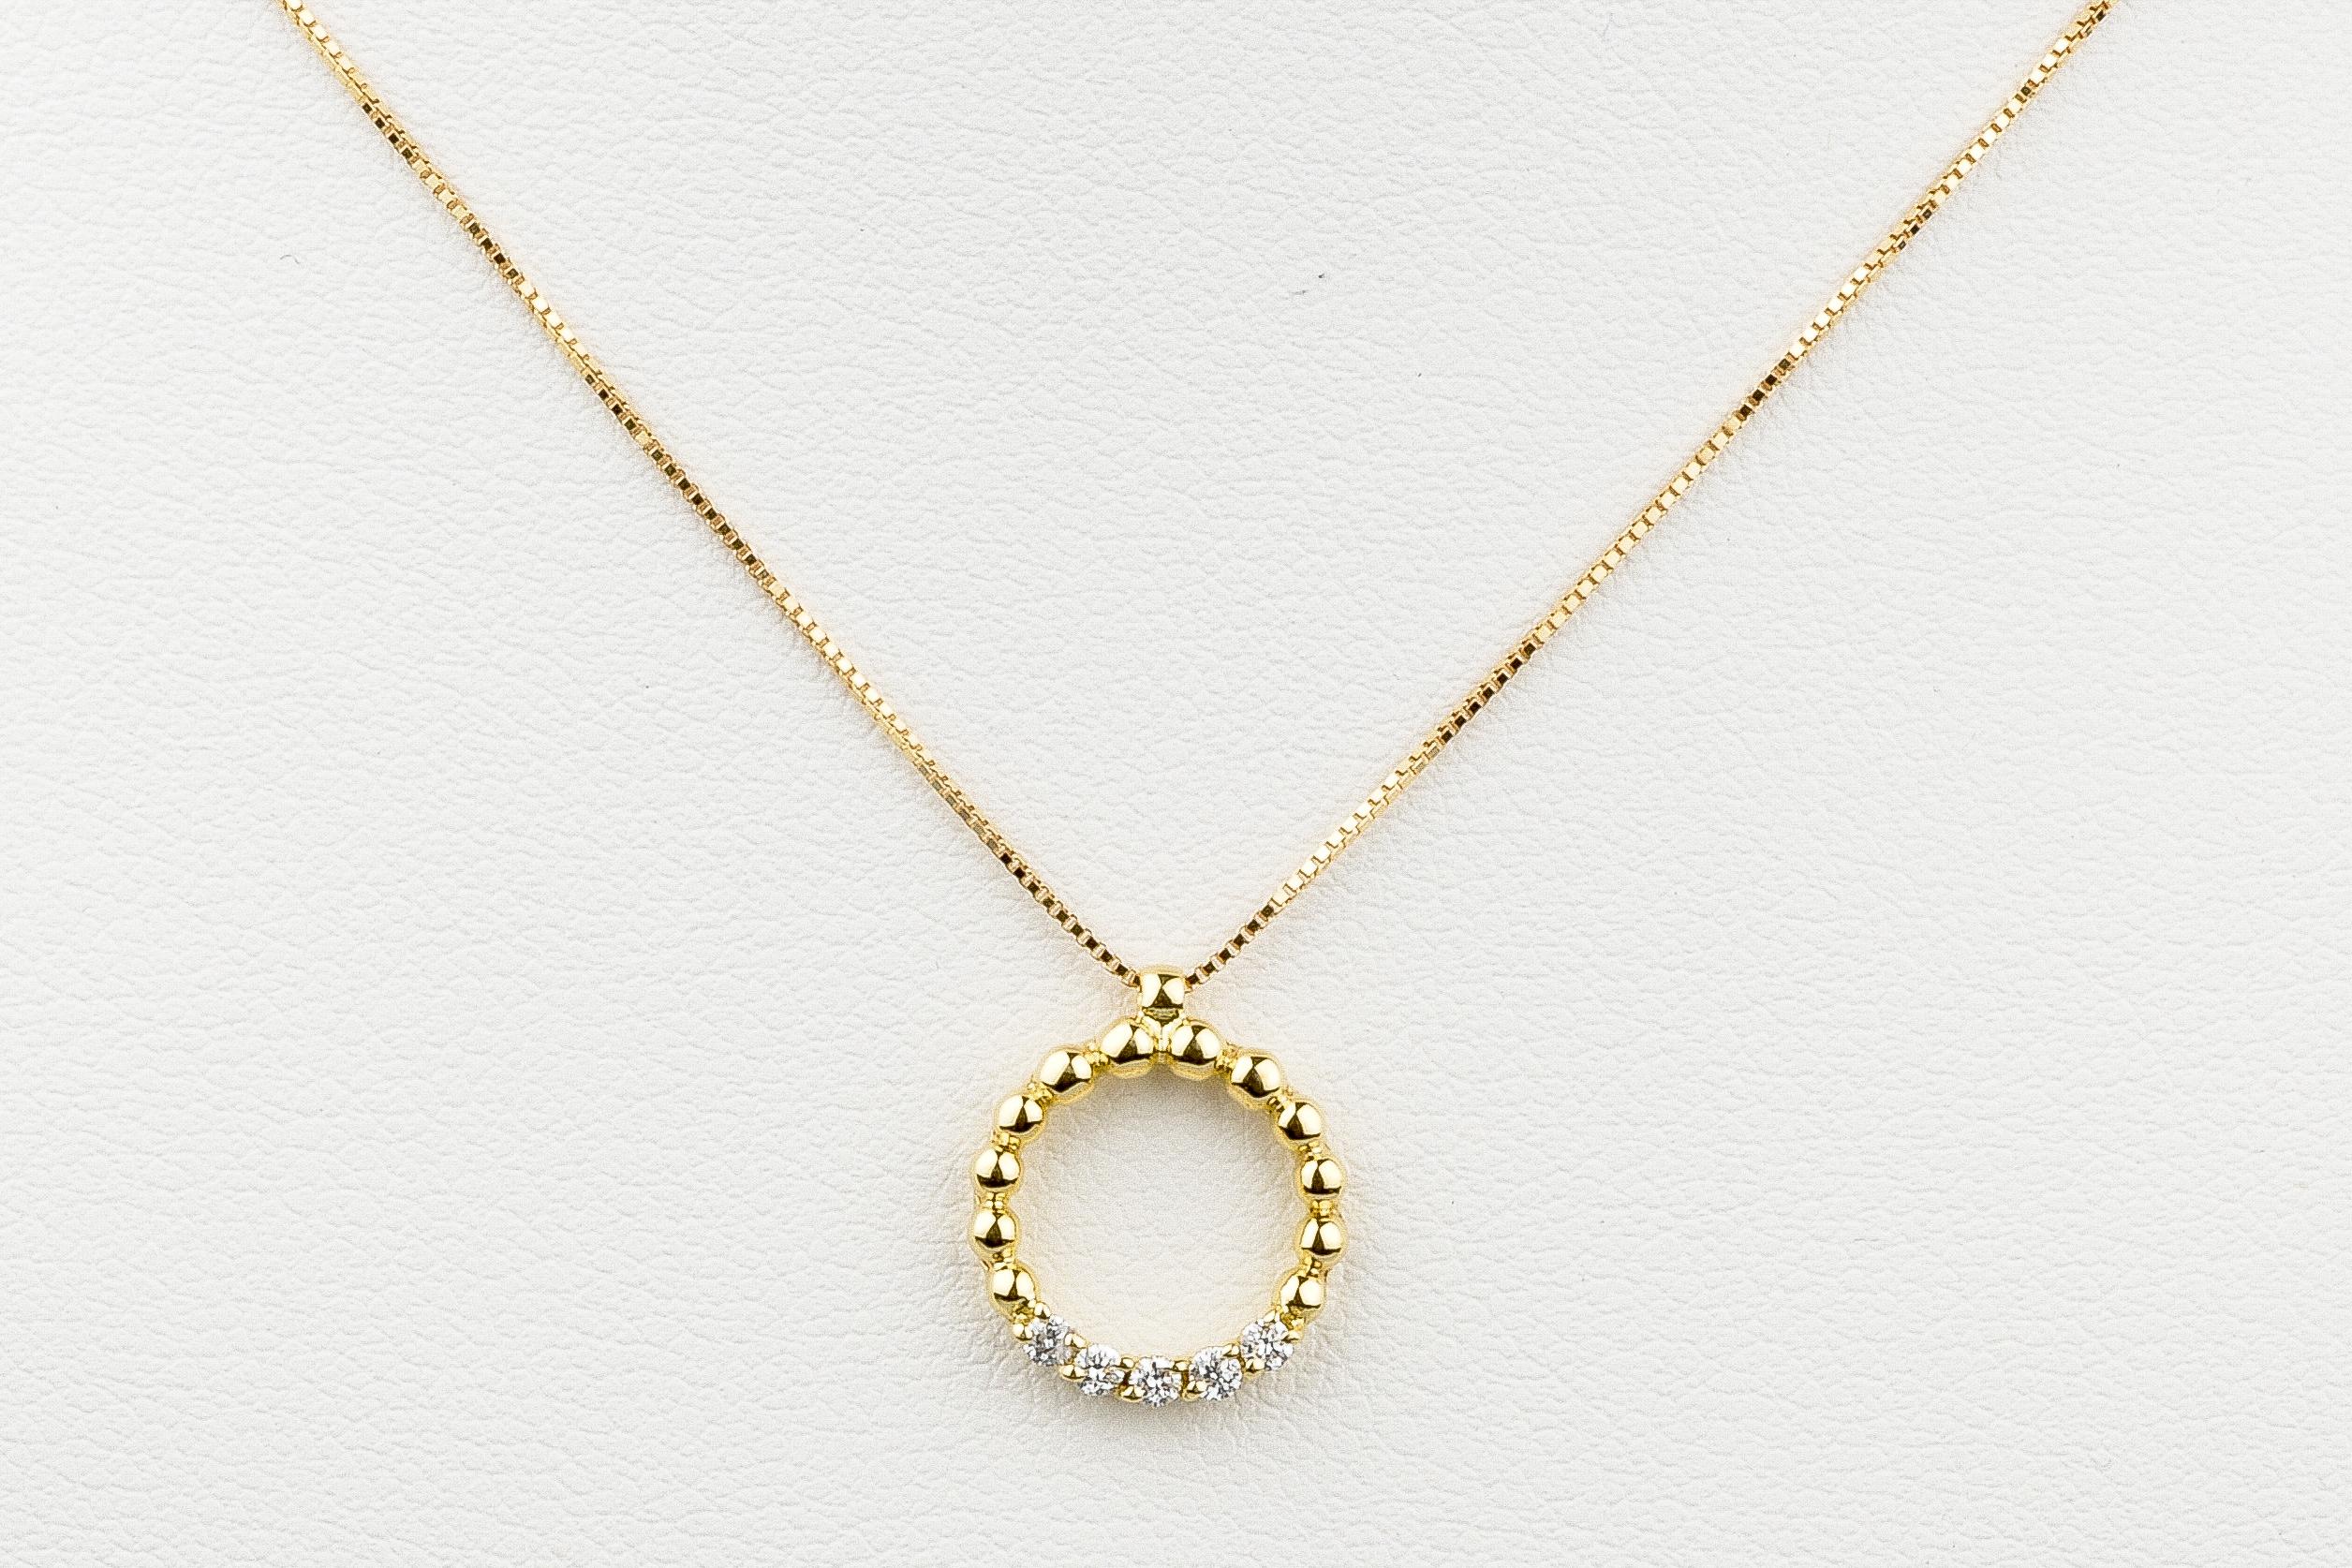 FLORINE model, necklace in solid 18K yellow gold adorned with 5 round brilliant synthetic diamonds of 0.1 carat. (0.02 ct each)

• Carats: 0.1 ct total

• Color: DEF

• Clarity: VS

• Venetian mesh, spring ring clasp.

• 2.50 grams

• Dimensions: 42